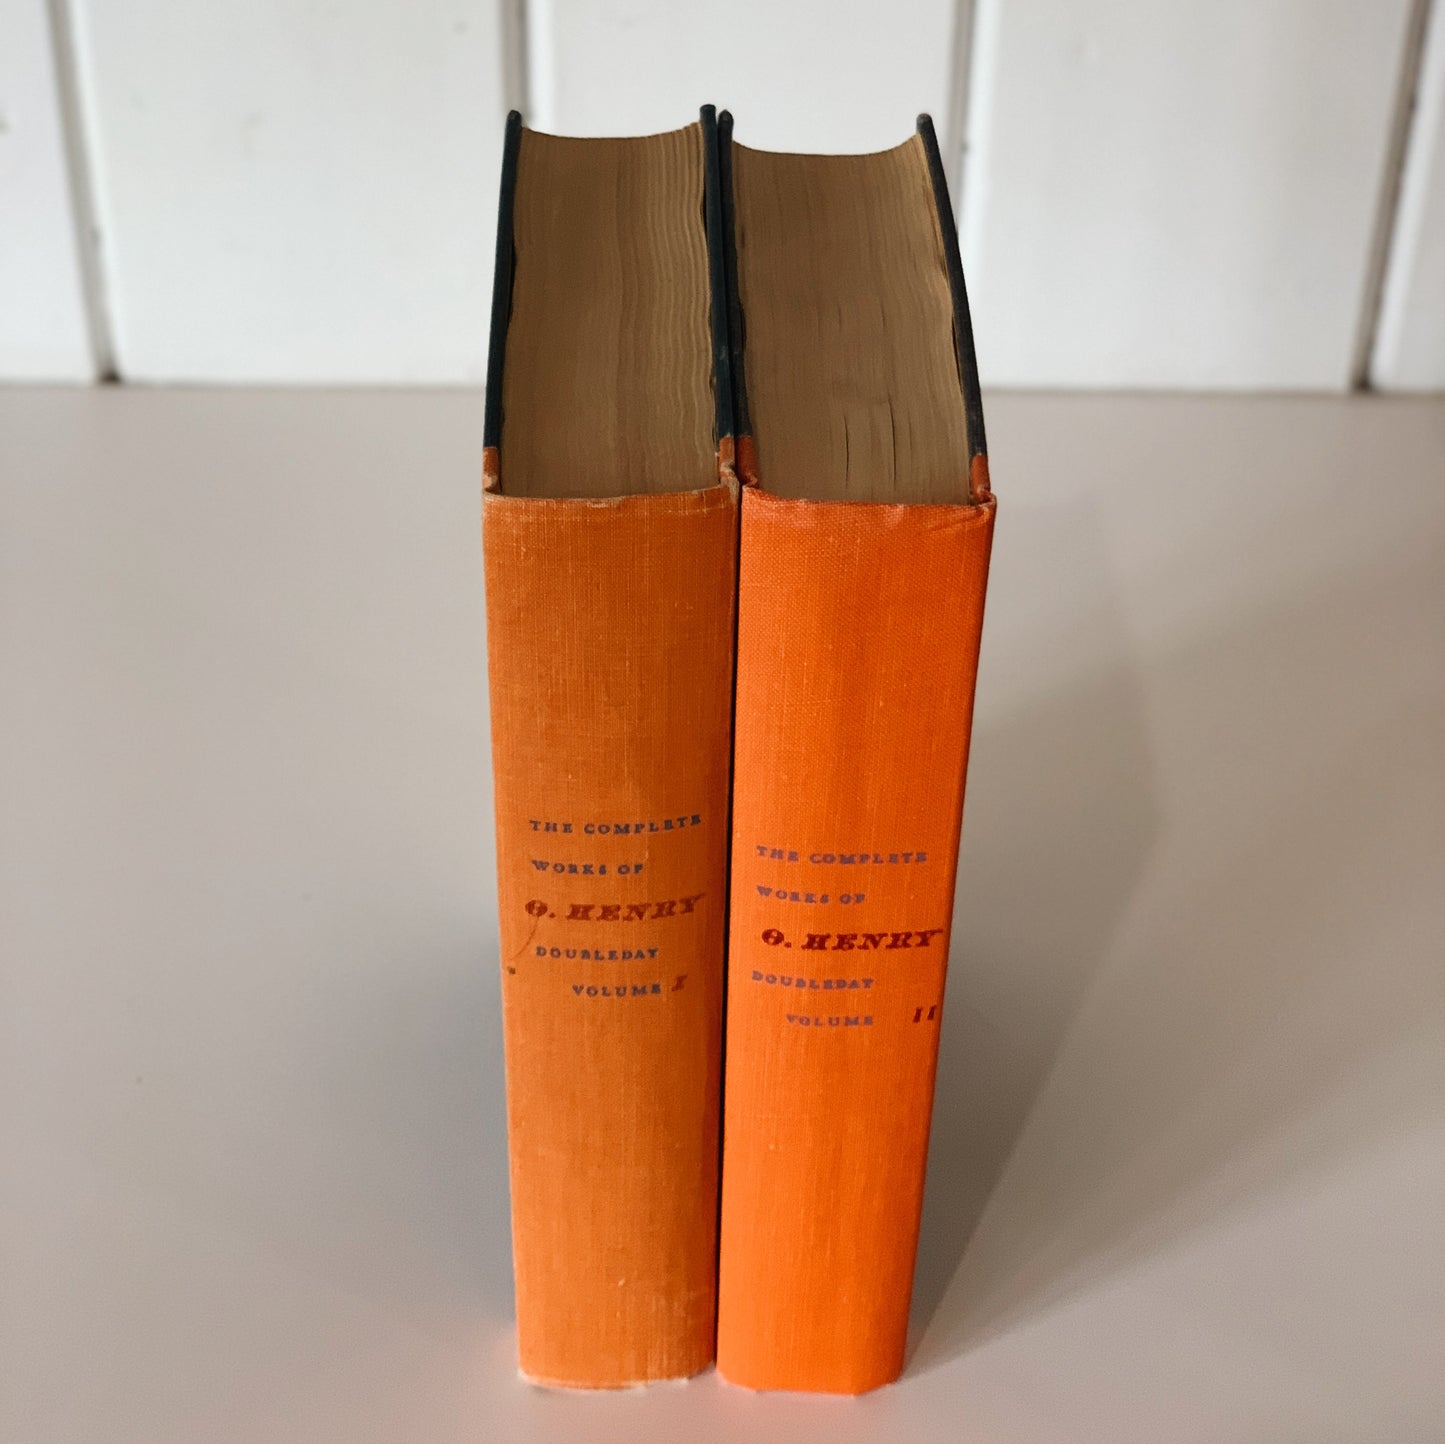 The Complete Works of O. Henry, Volumes 1-2, 1953, Orange Hardcover